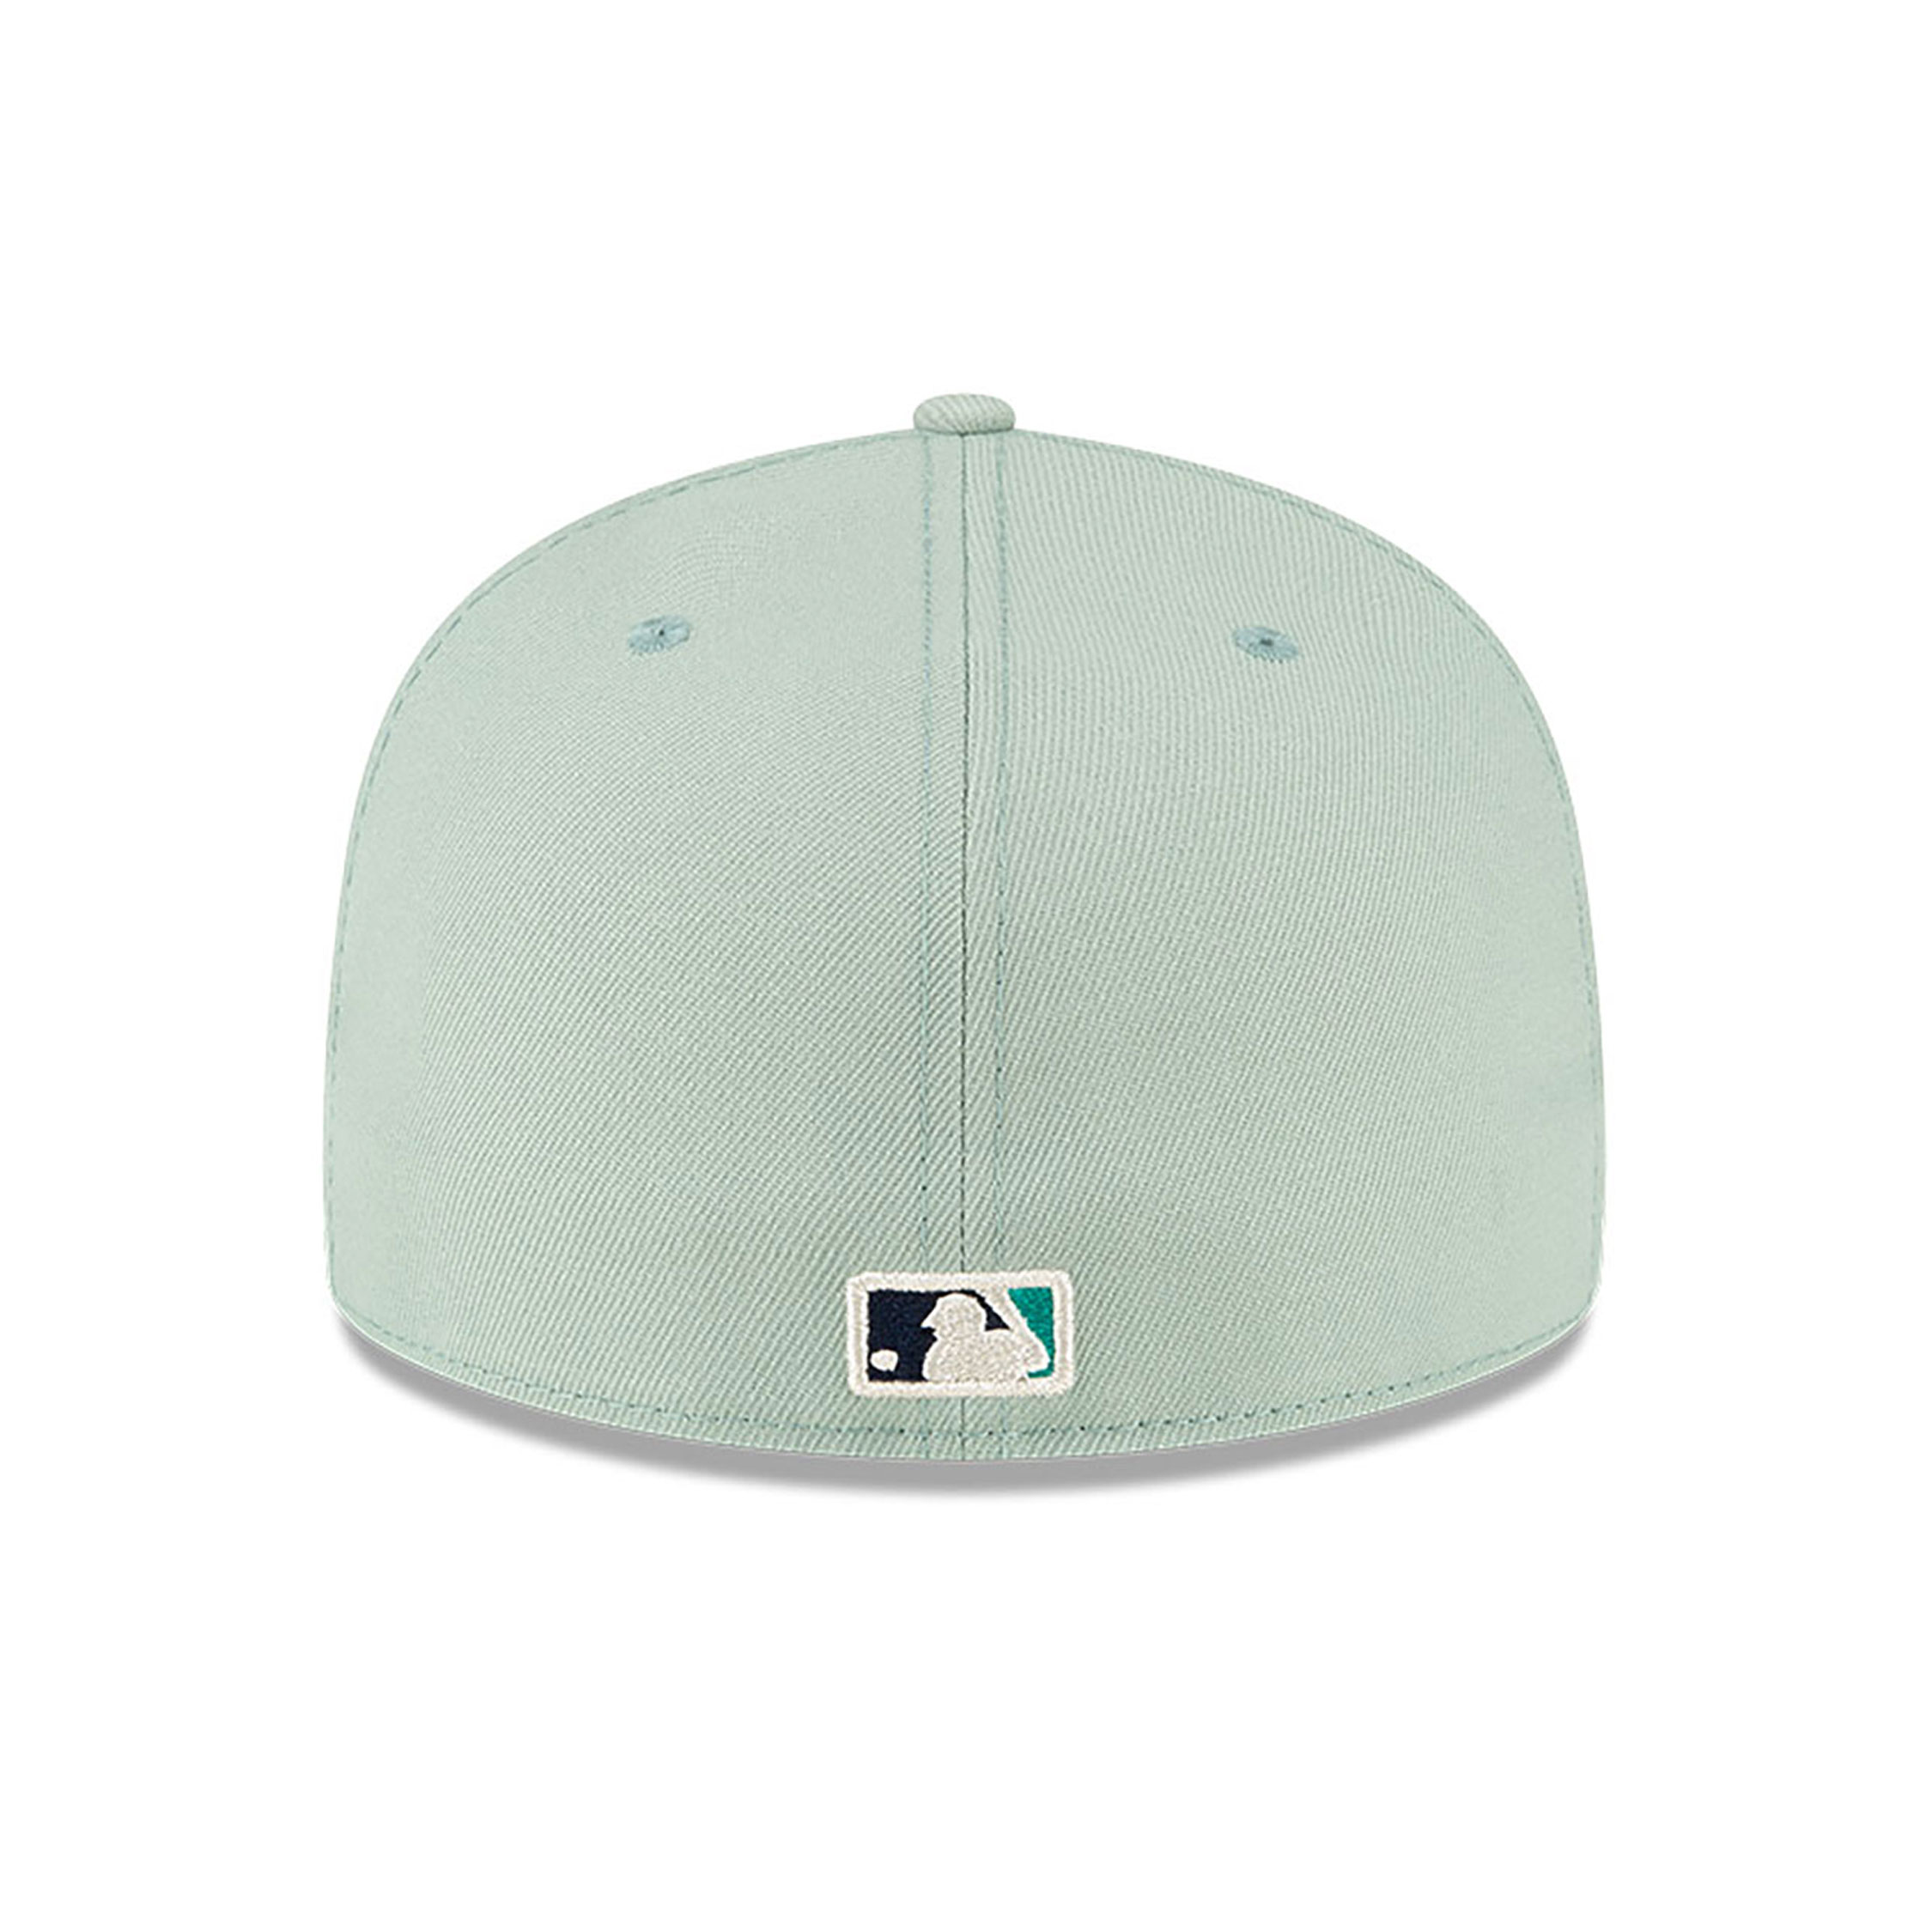 Chicago White Sox All Star Game Pastel Green 59FIFTY Fitted Cap